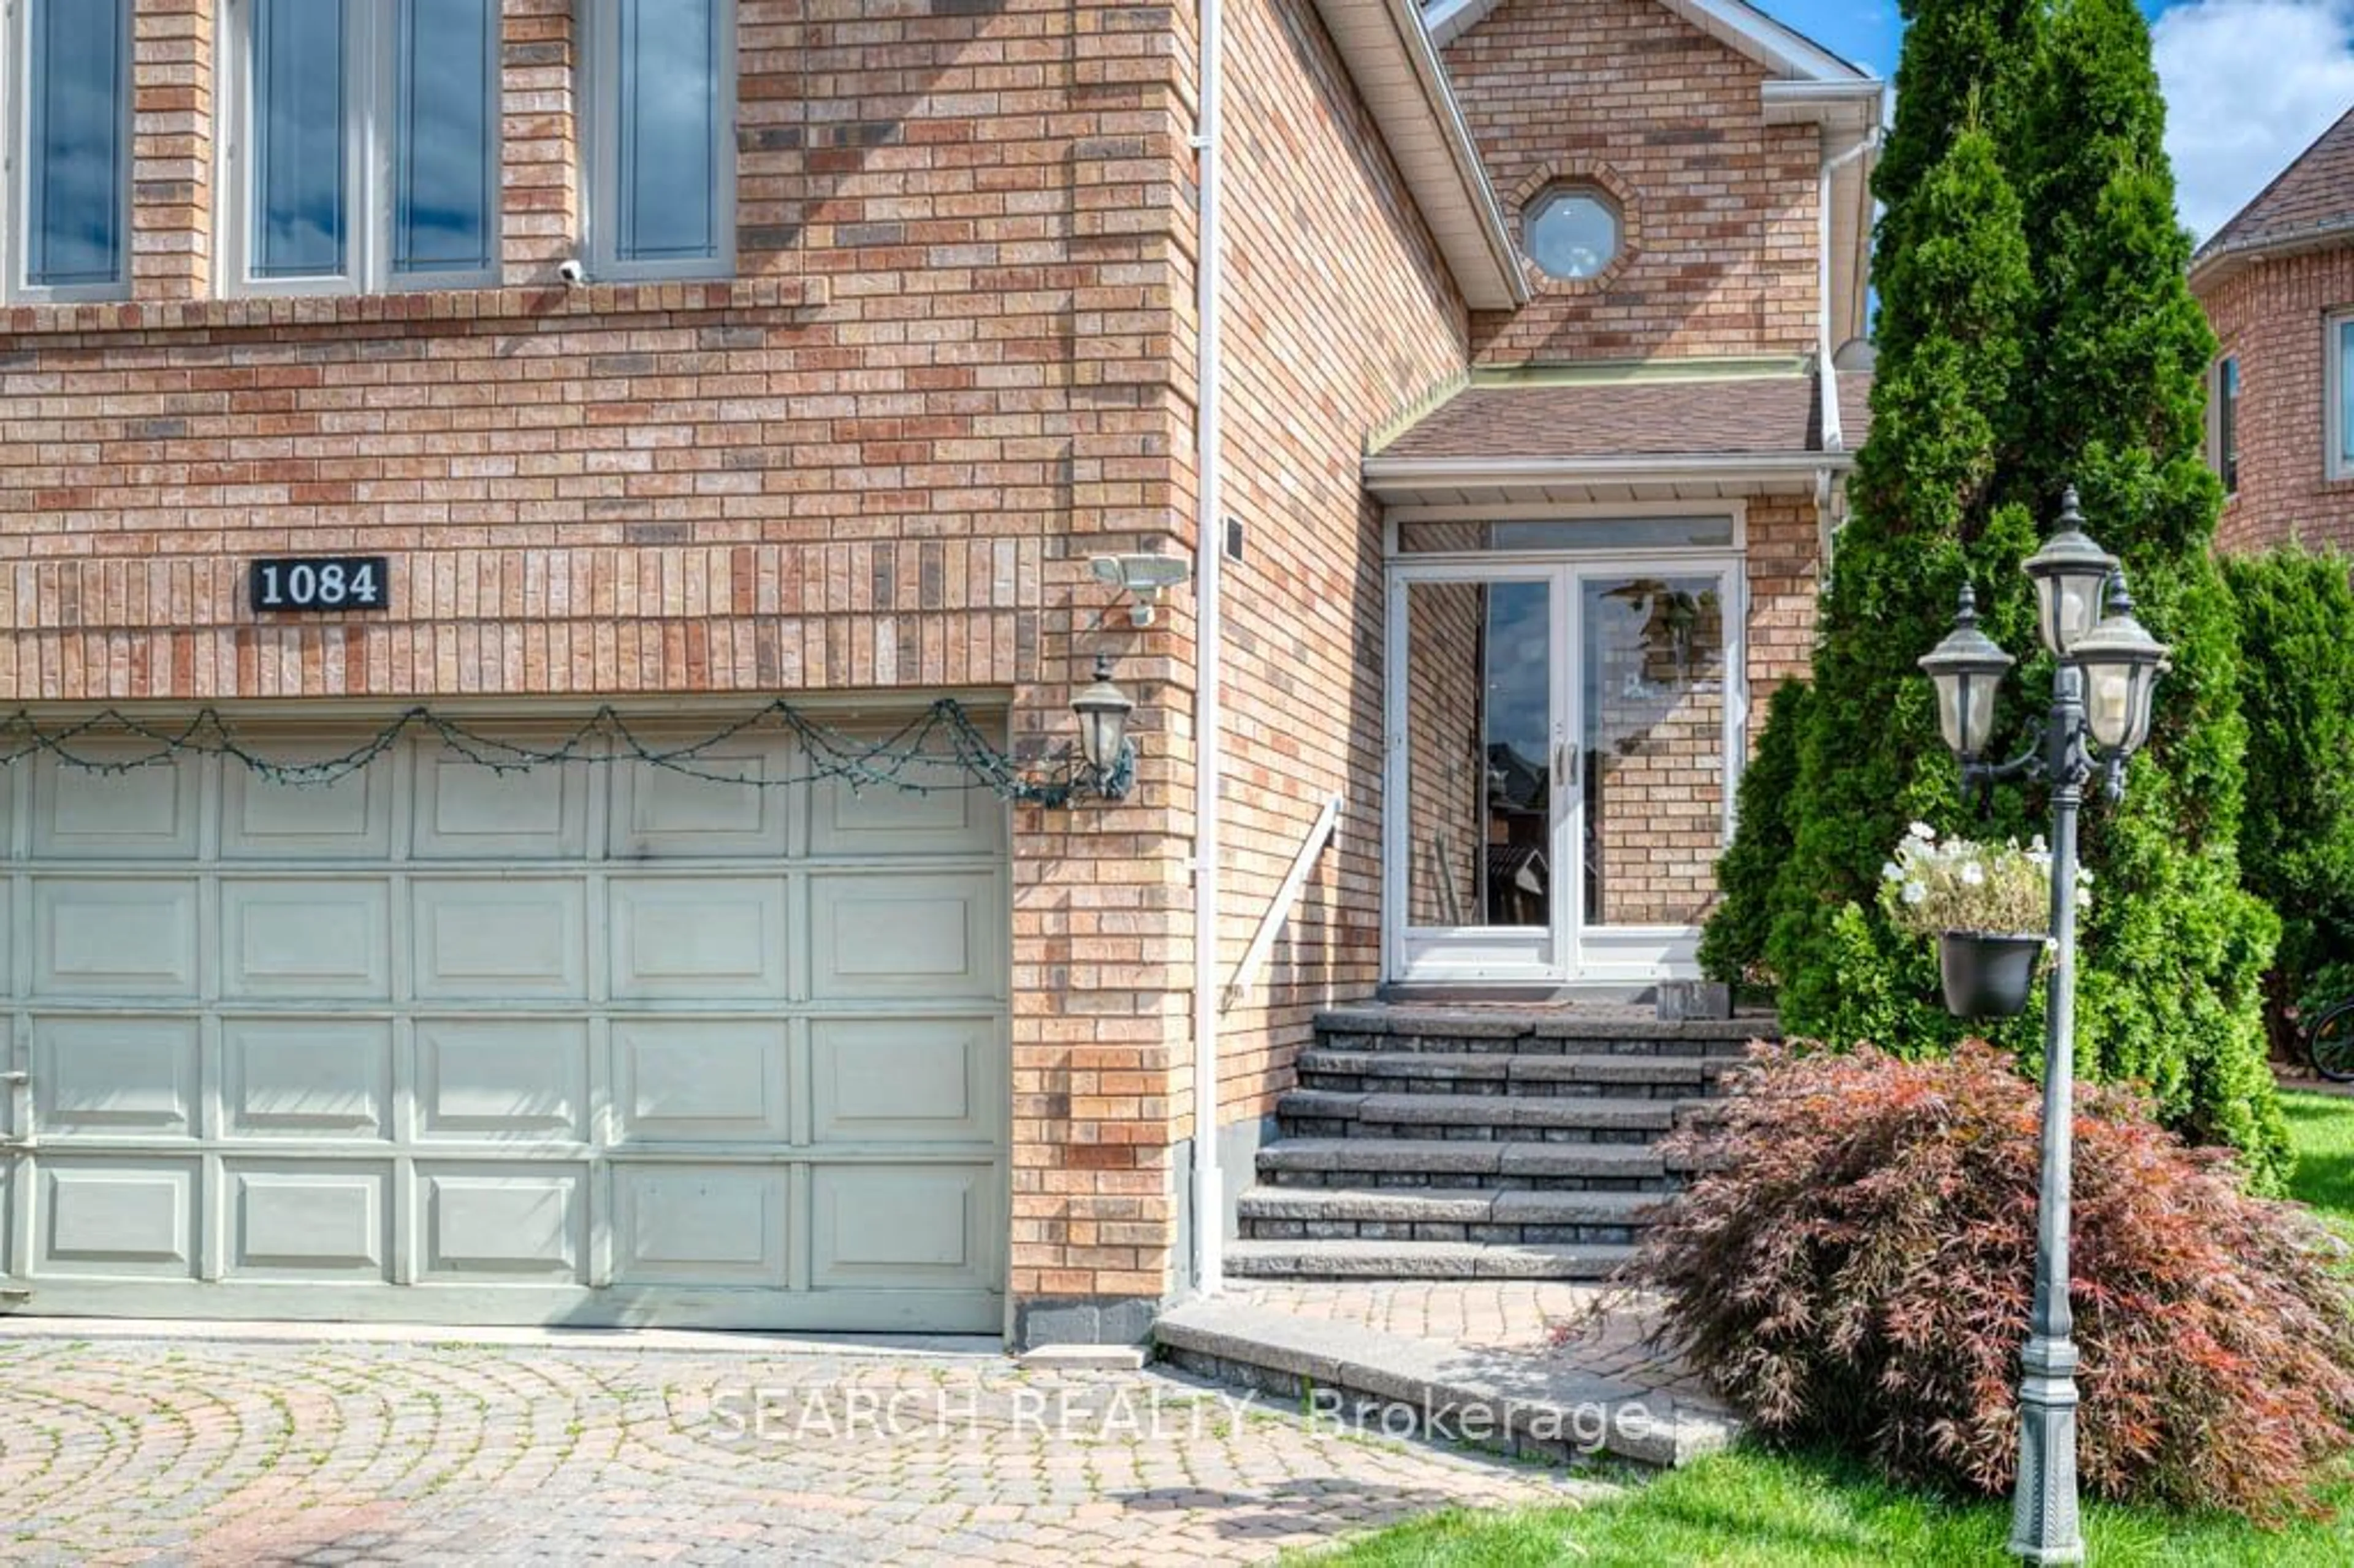 Home with brick exterior material for 1084 Charminster Cres, Mississauga Ontario L5V 1R1